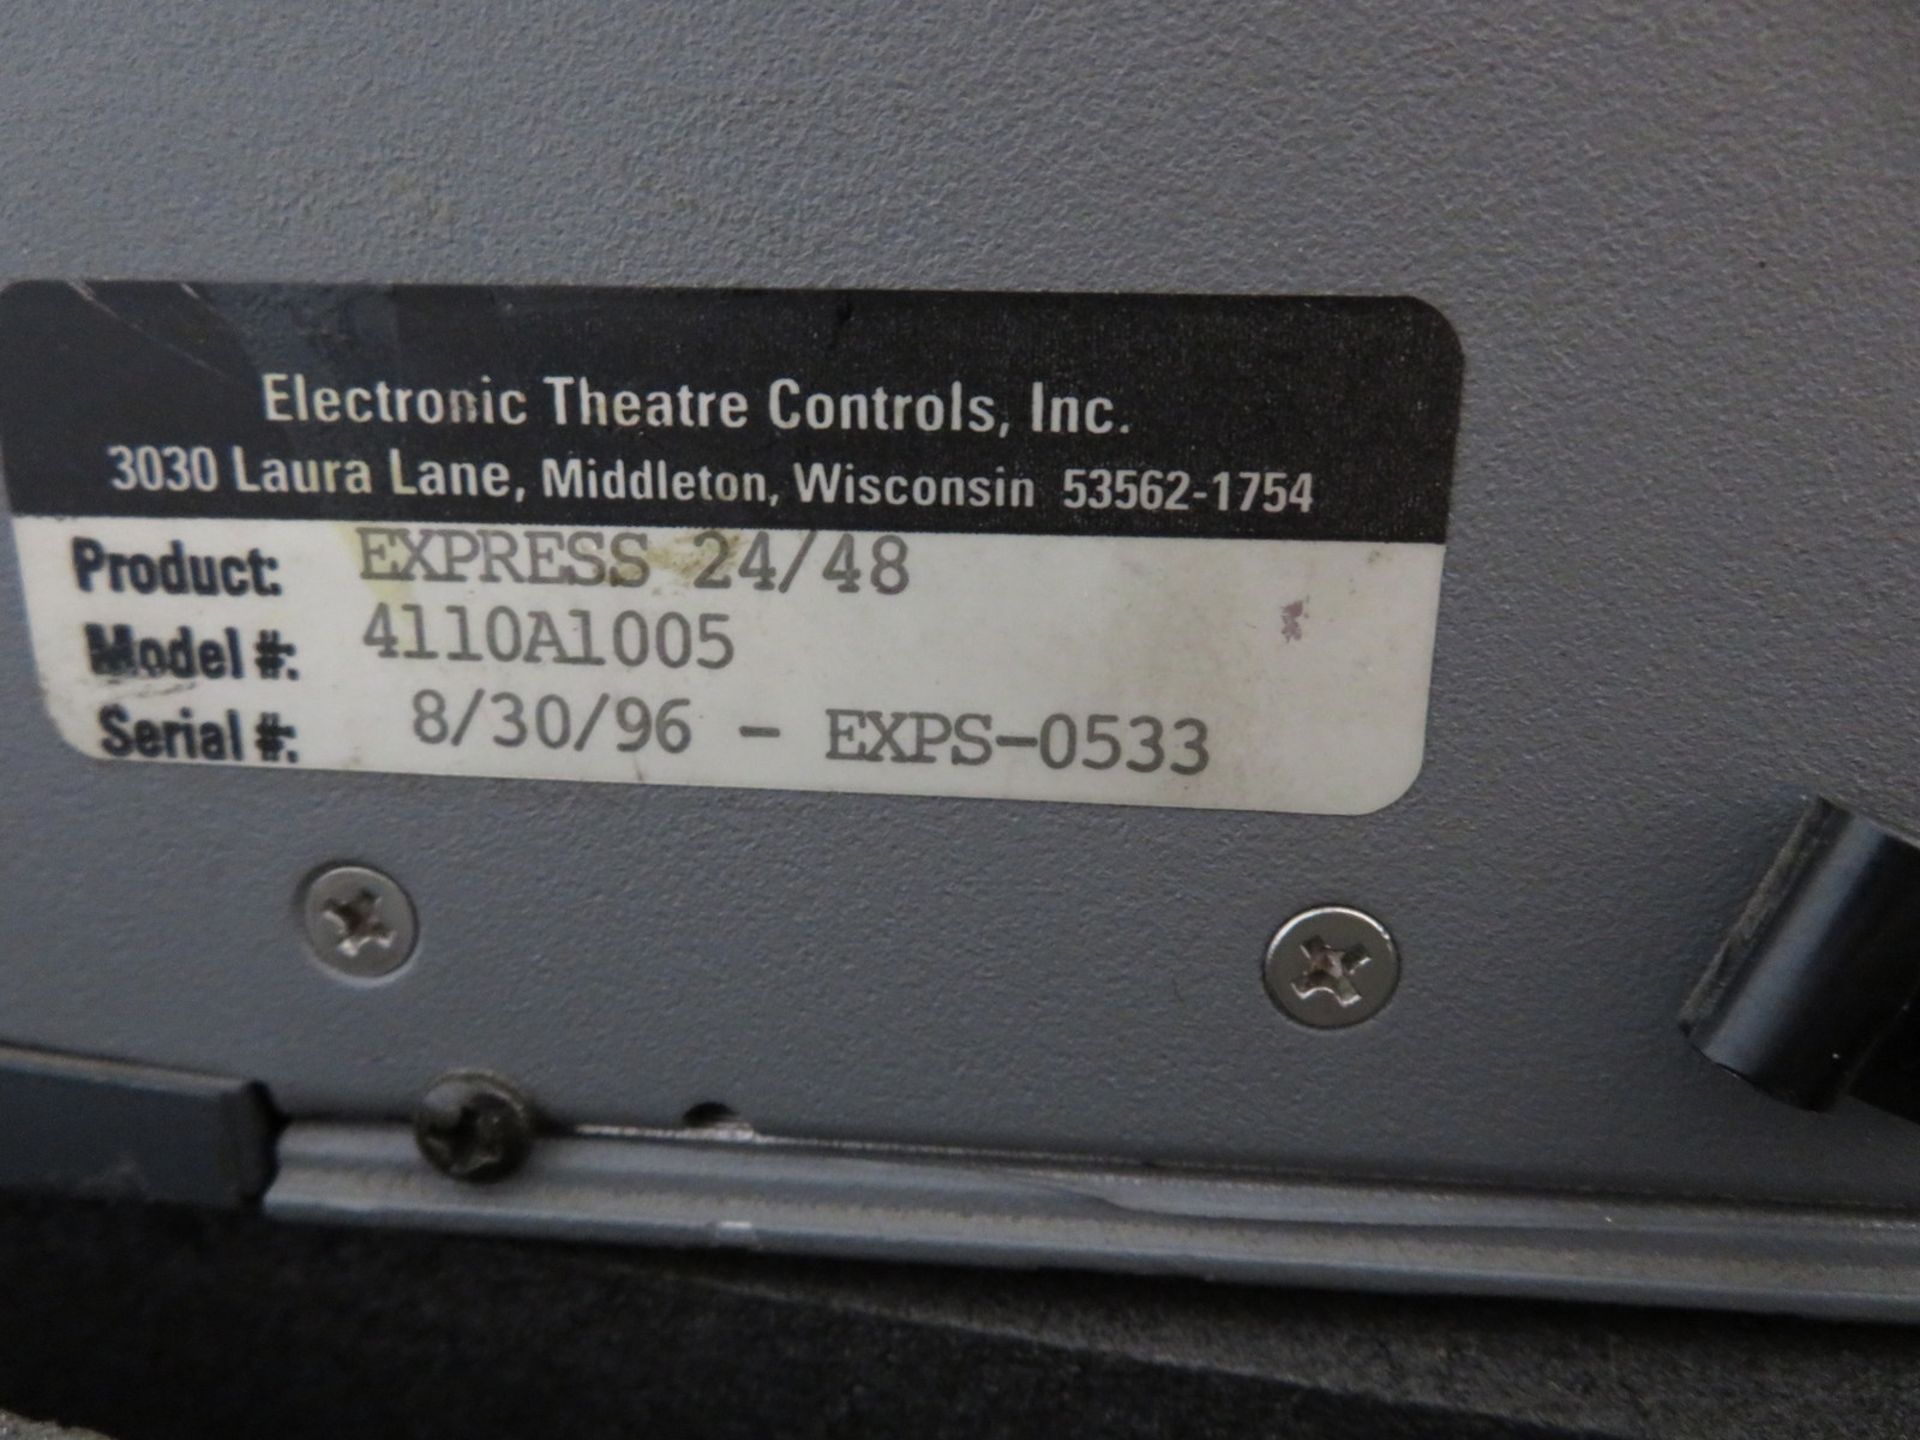 ETC Express 24/48 lighting control console with flightcase. Working Condition. - Image 7 of 8